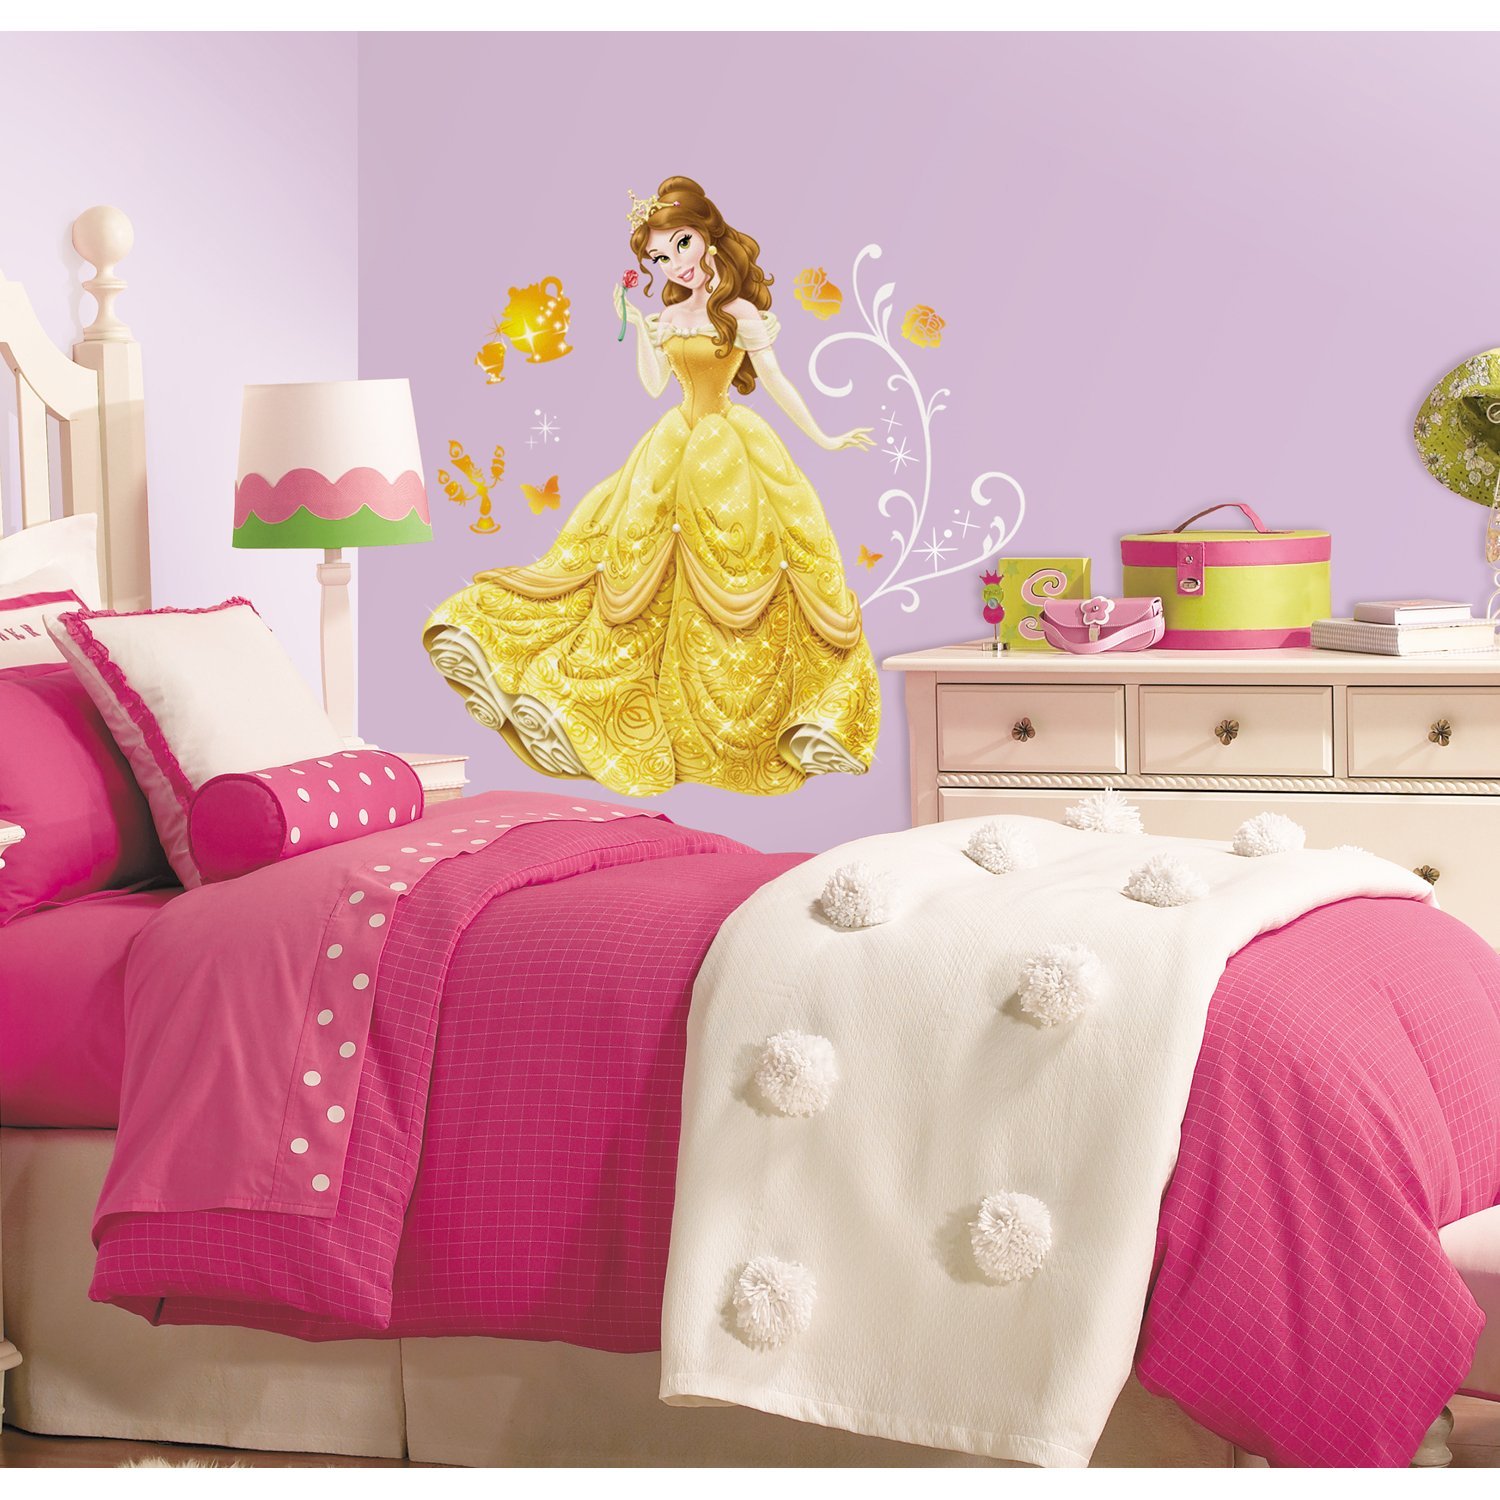 Disney Princess Belle Giant Wall Decals with Glitter